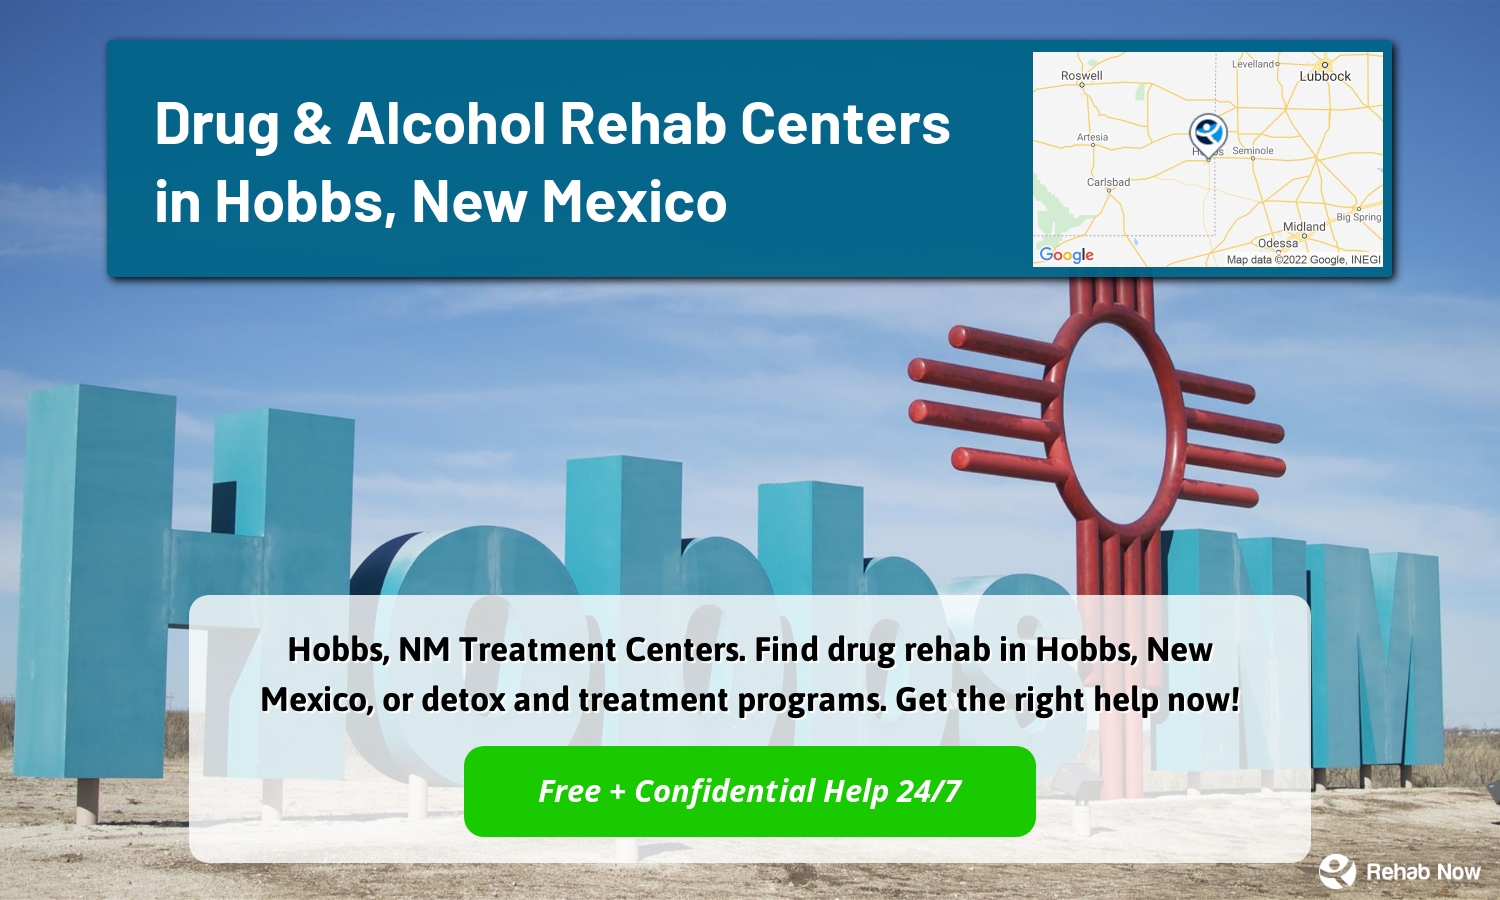 Hobbs, NM Treatment Centers. Find drug rehab in Hobbs, New Mexico, or detox and treatment programs. Get the right help now!